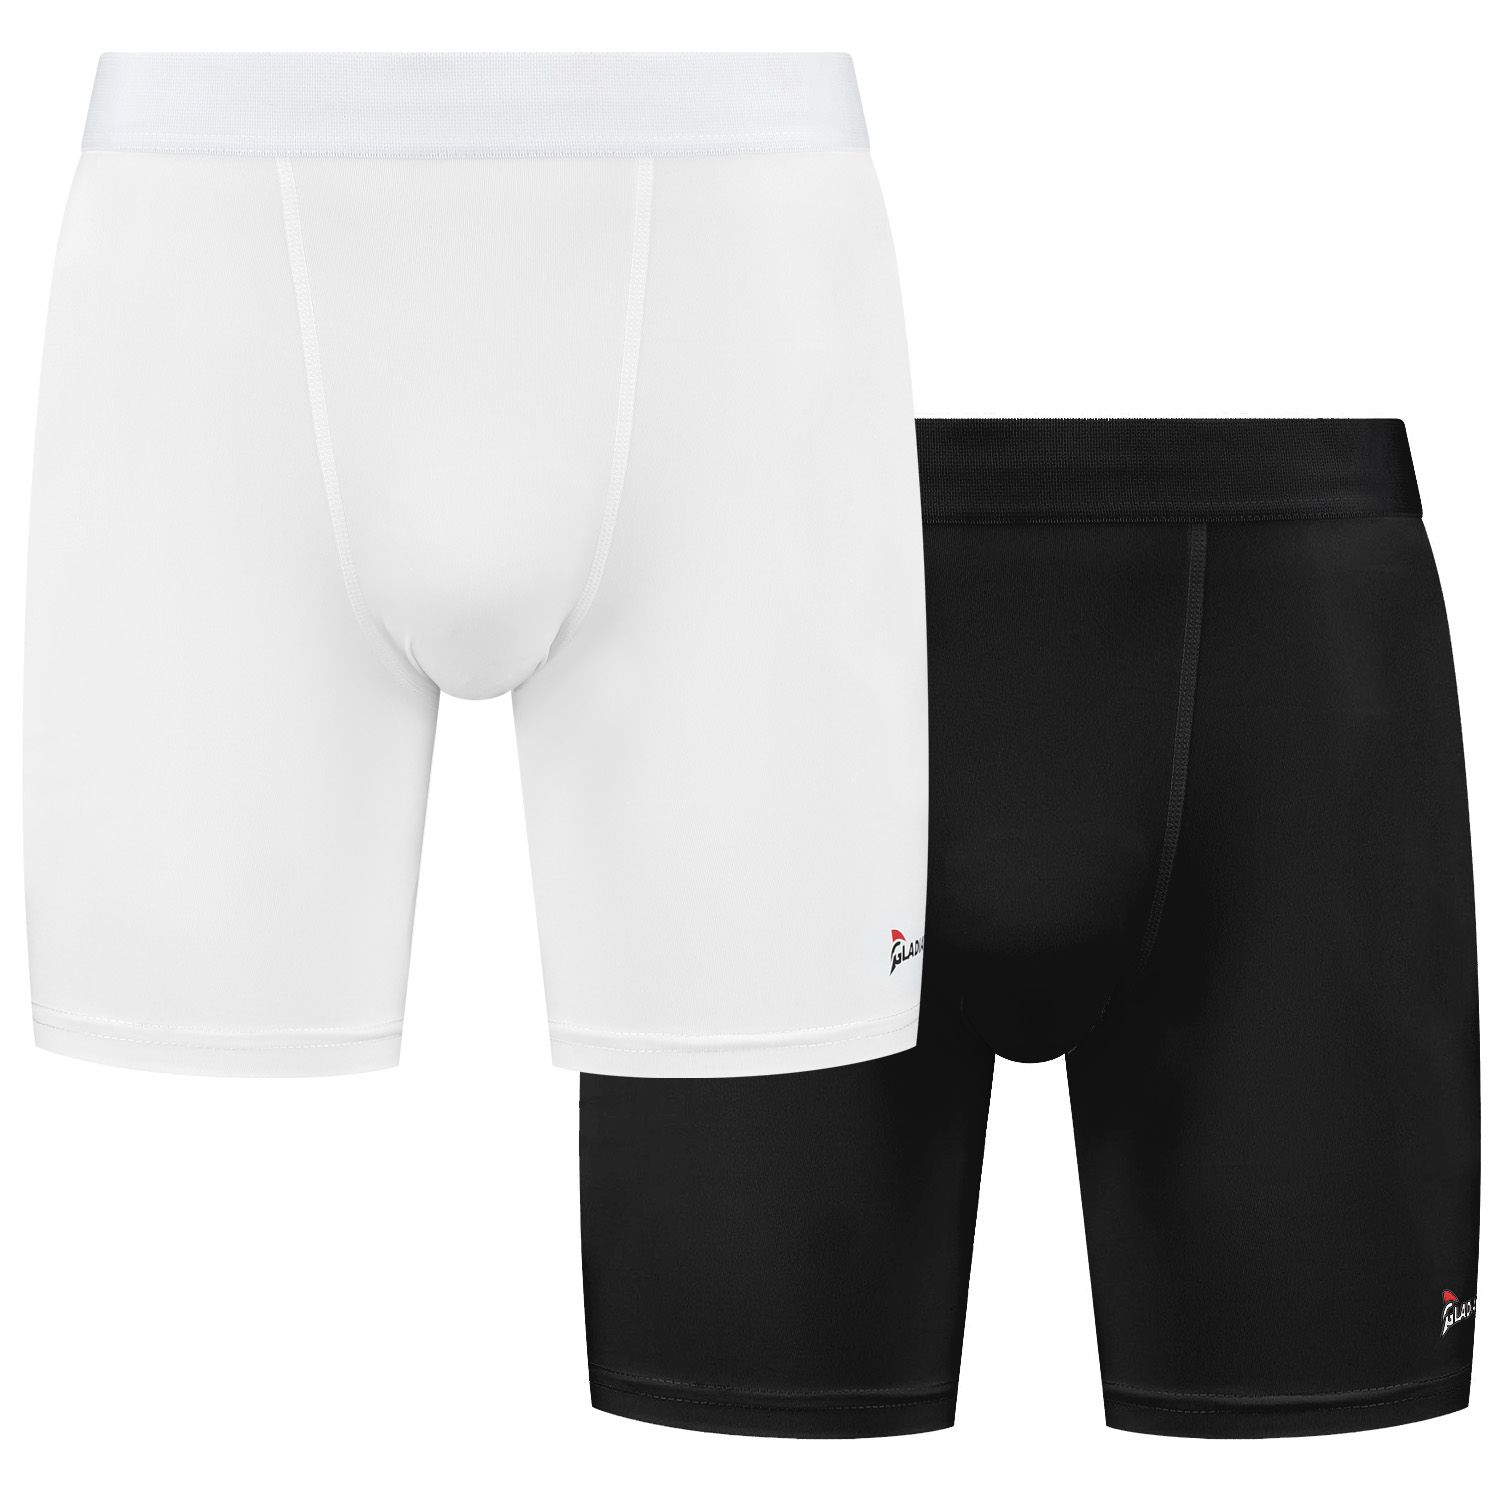 gladiator sports mens compression shorts in black and white front